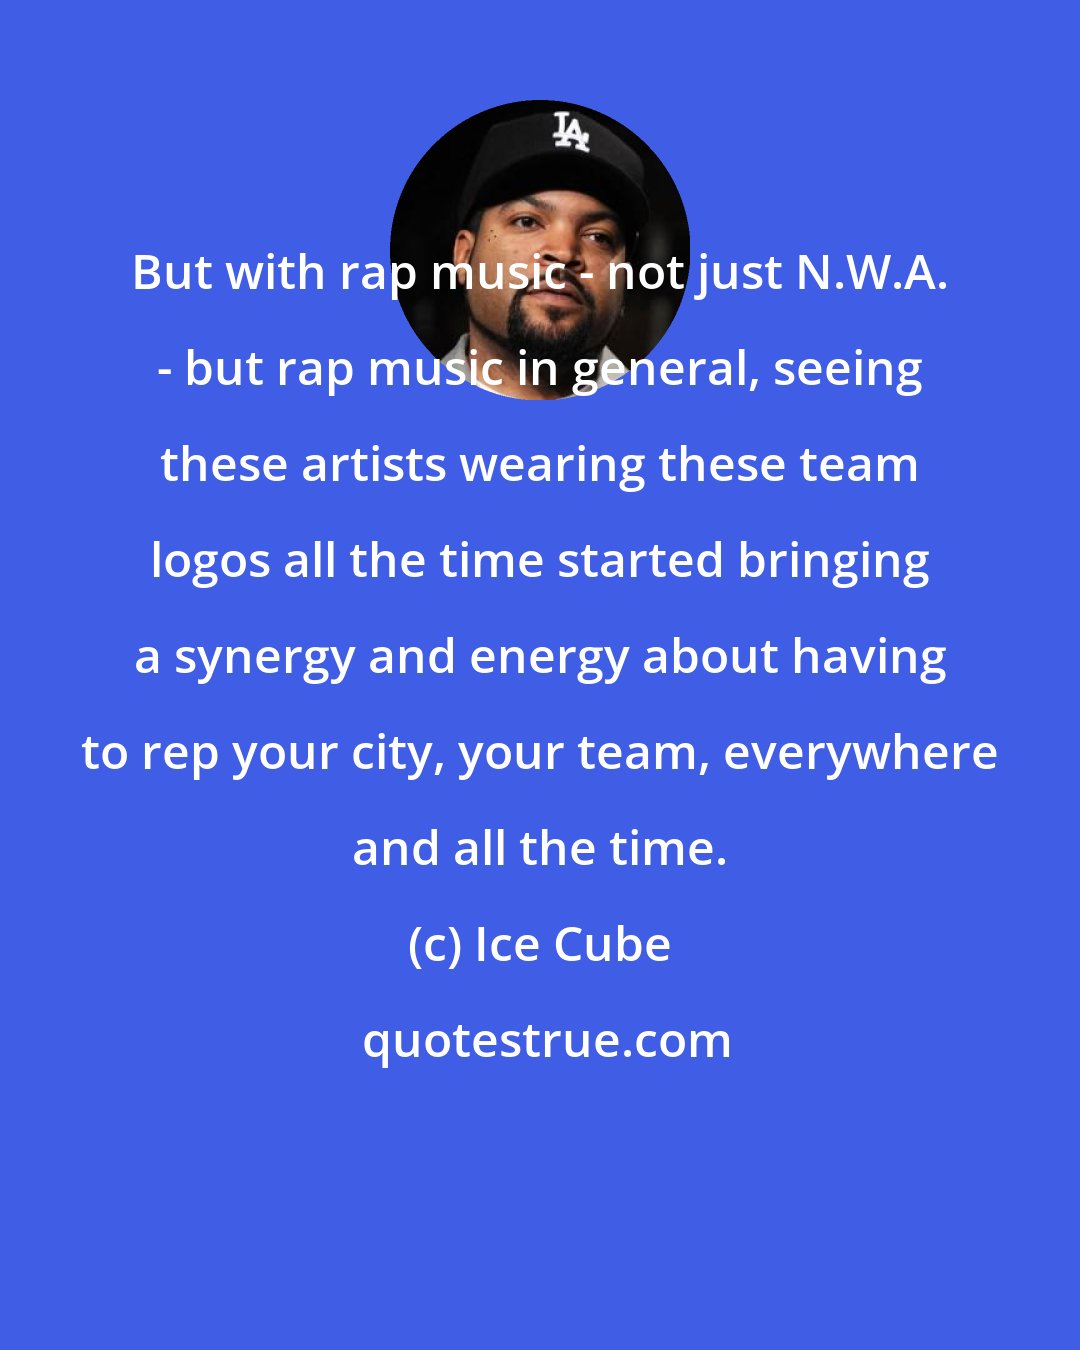 Ice Cube: But with rap music - not just N.W.A. - but rap music in general, seeing these artists wearing these team logos all the time started bringing a synergy and energy about having to rep your city, your team, everywhere and all the time.